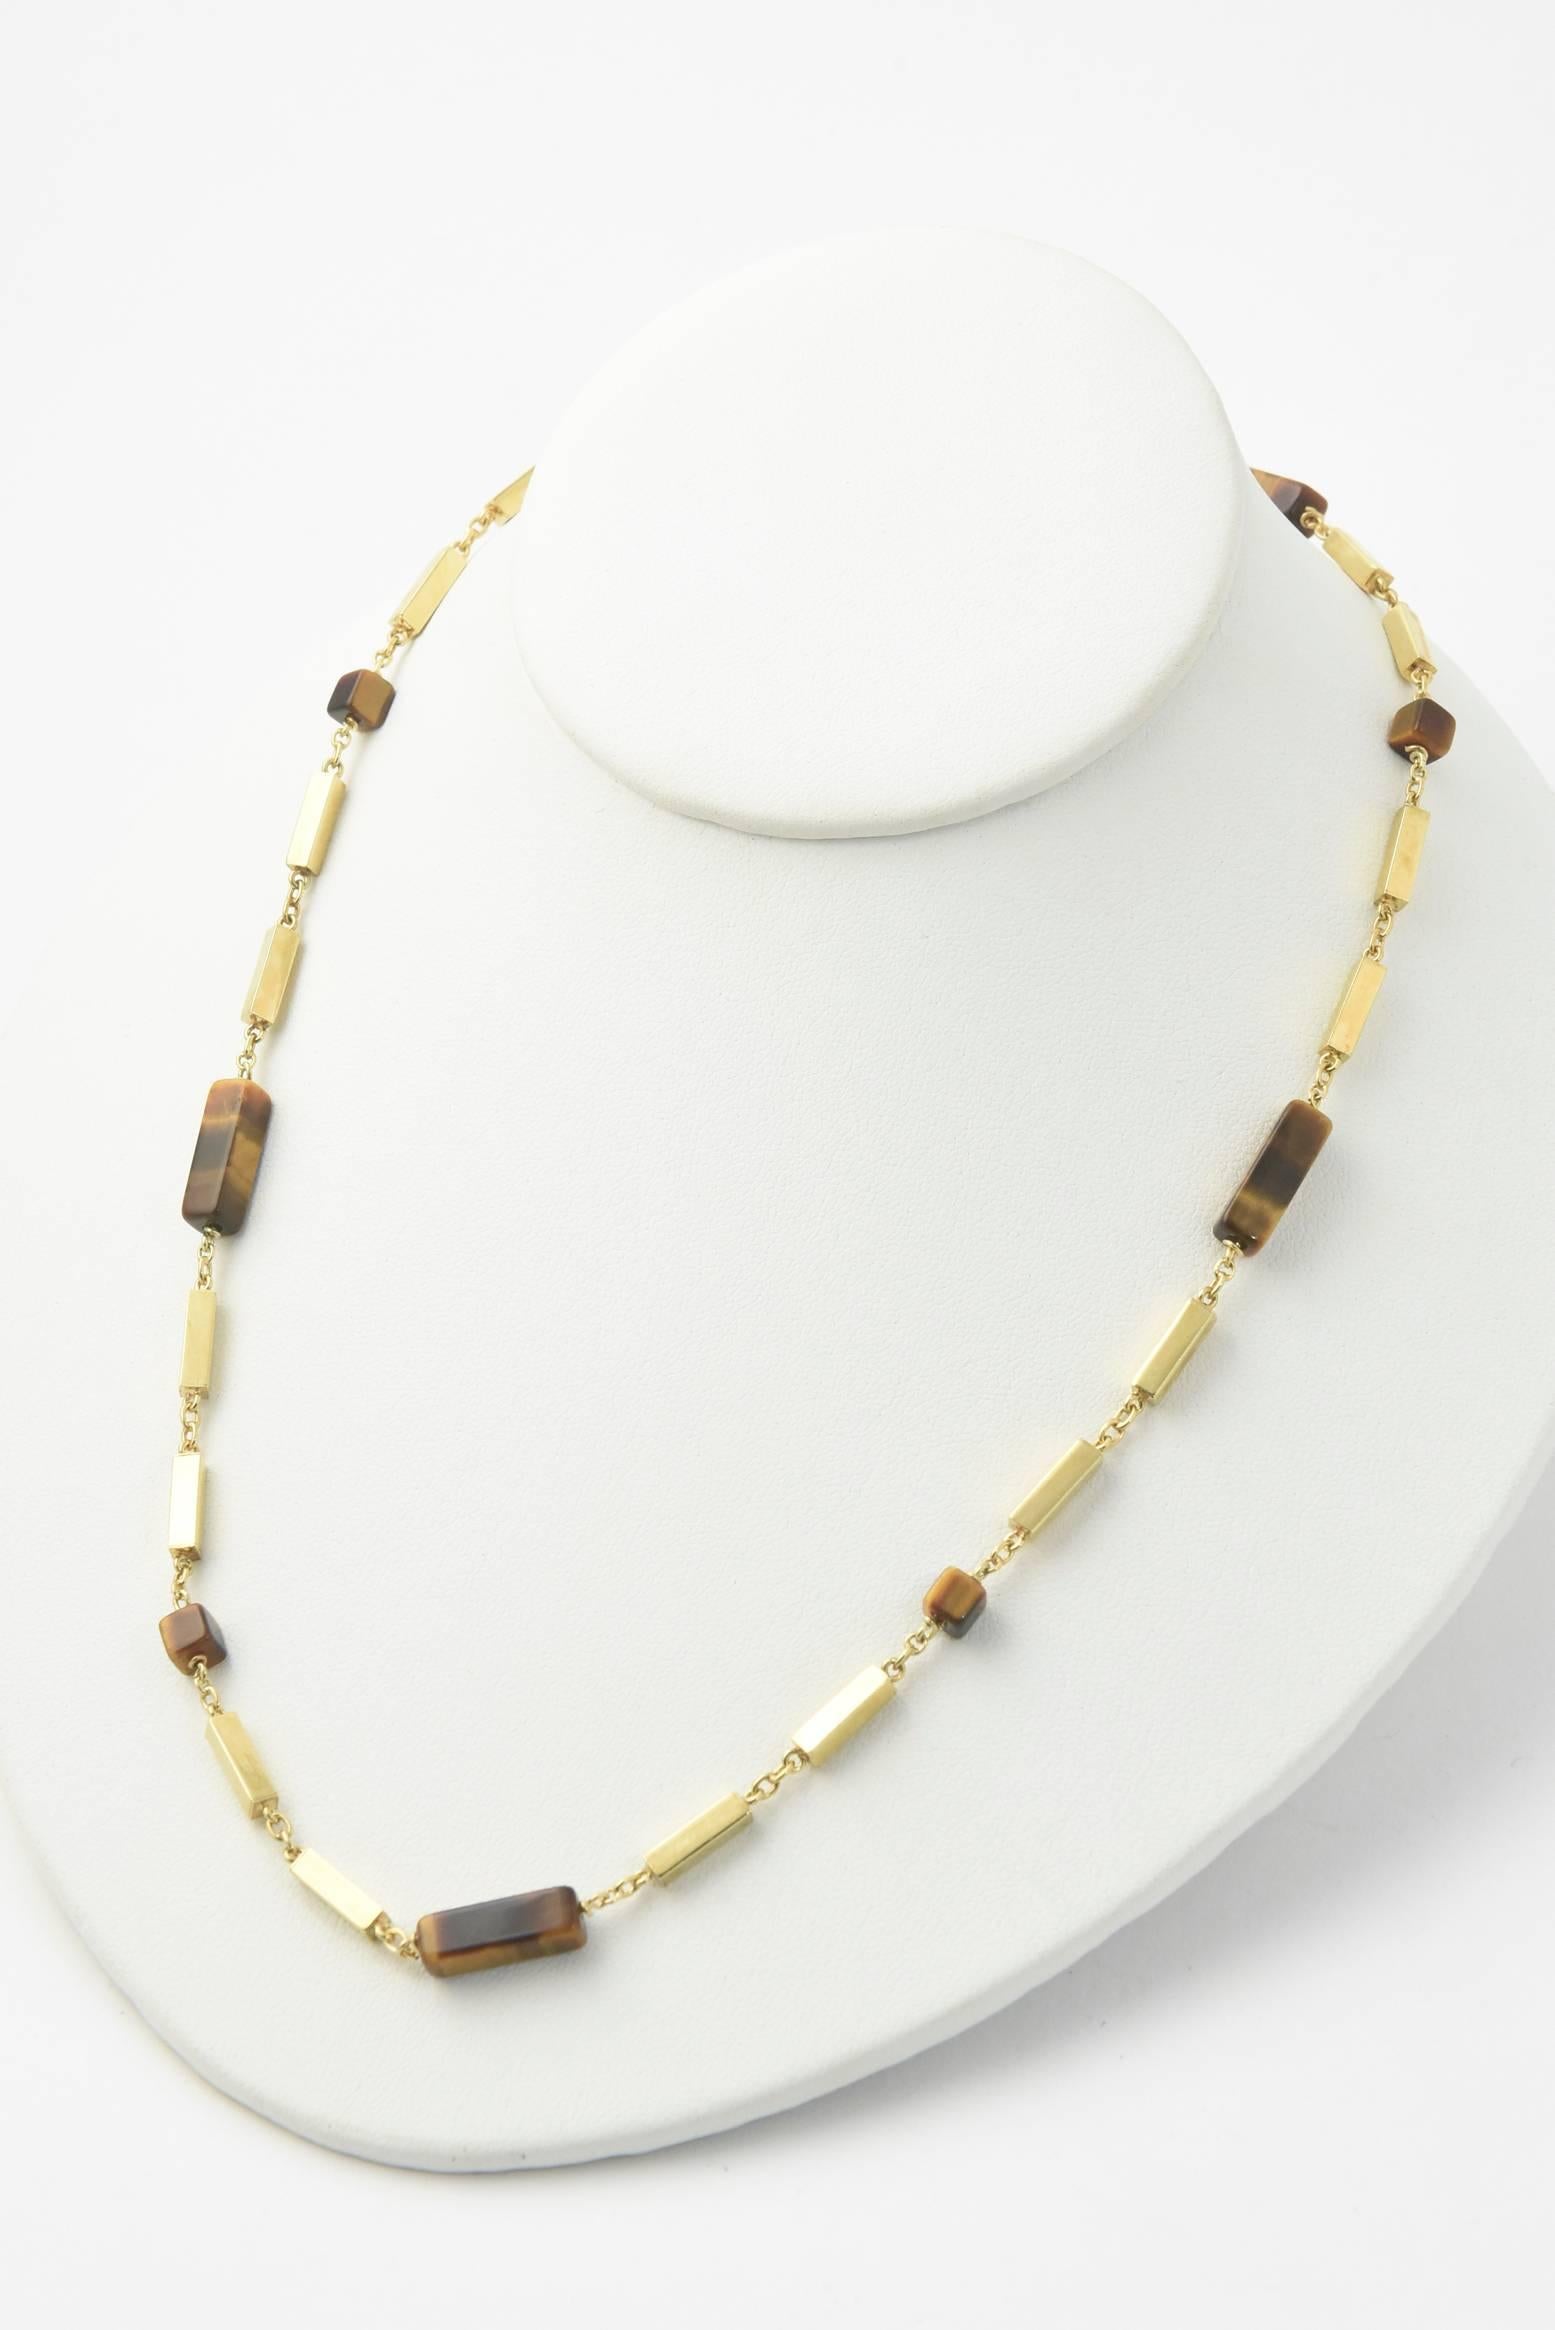 1970s Tiger's Eye Gold Bar Necklace 4